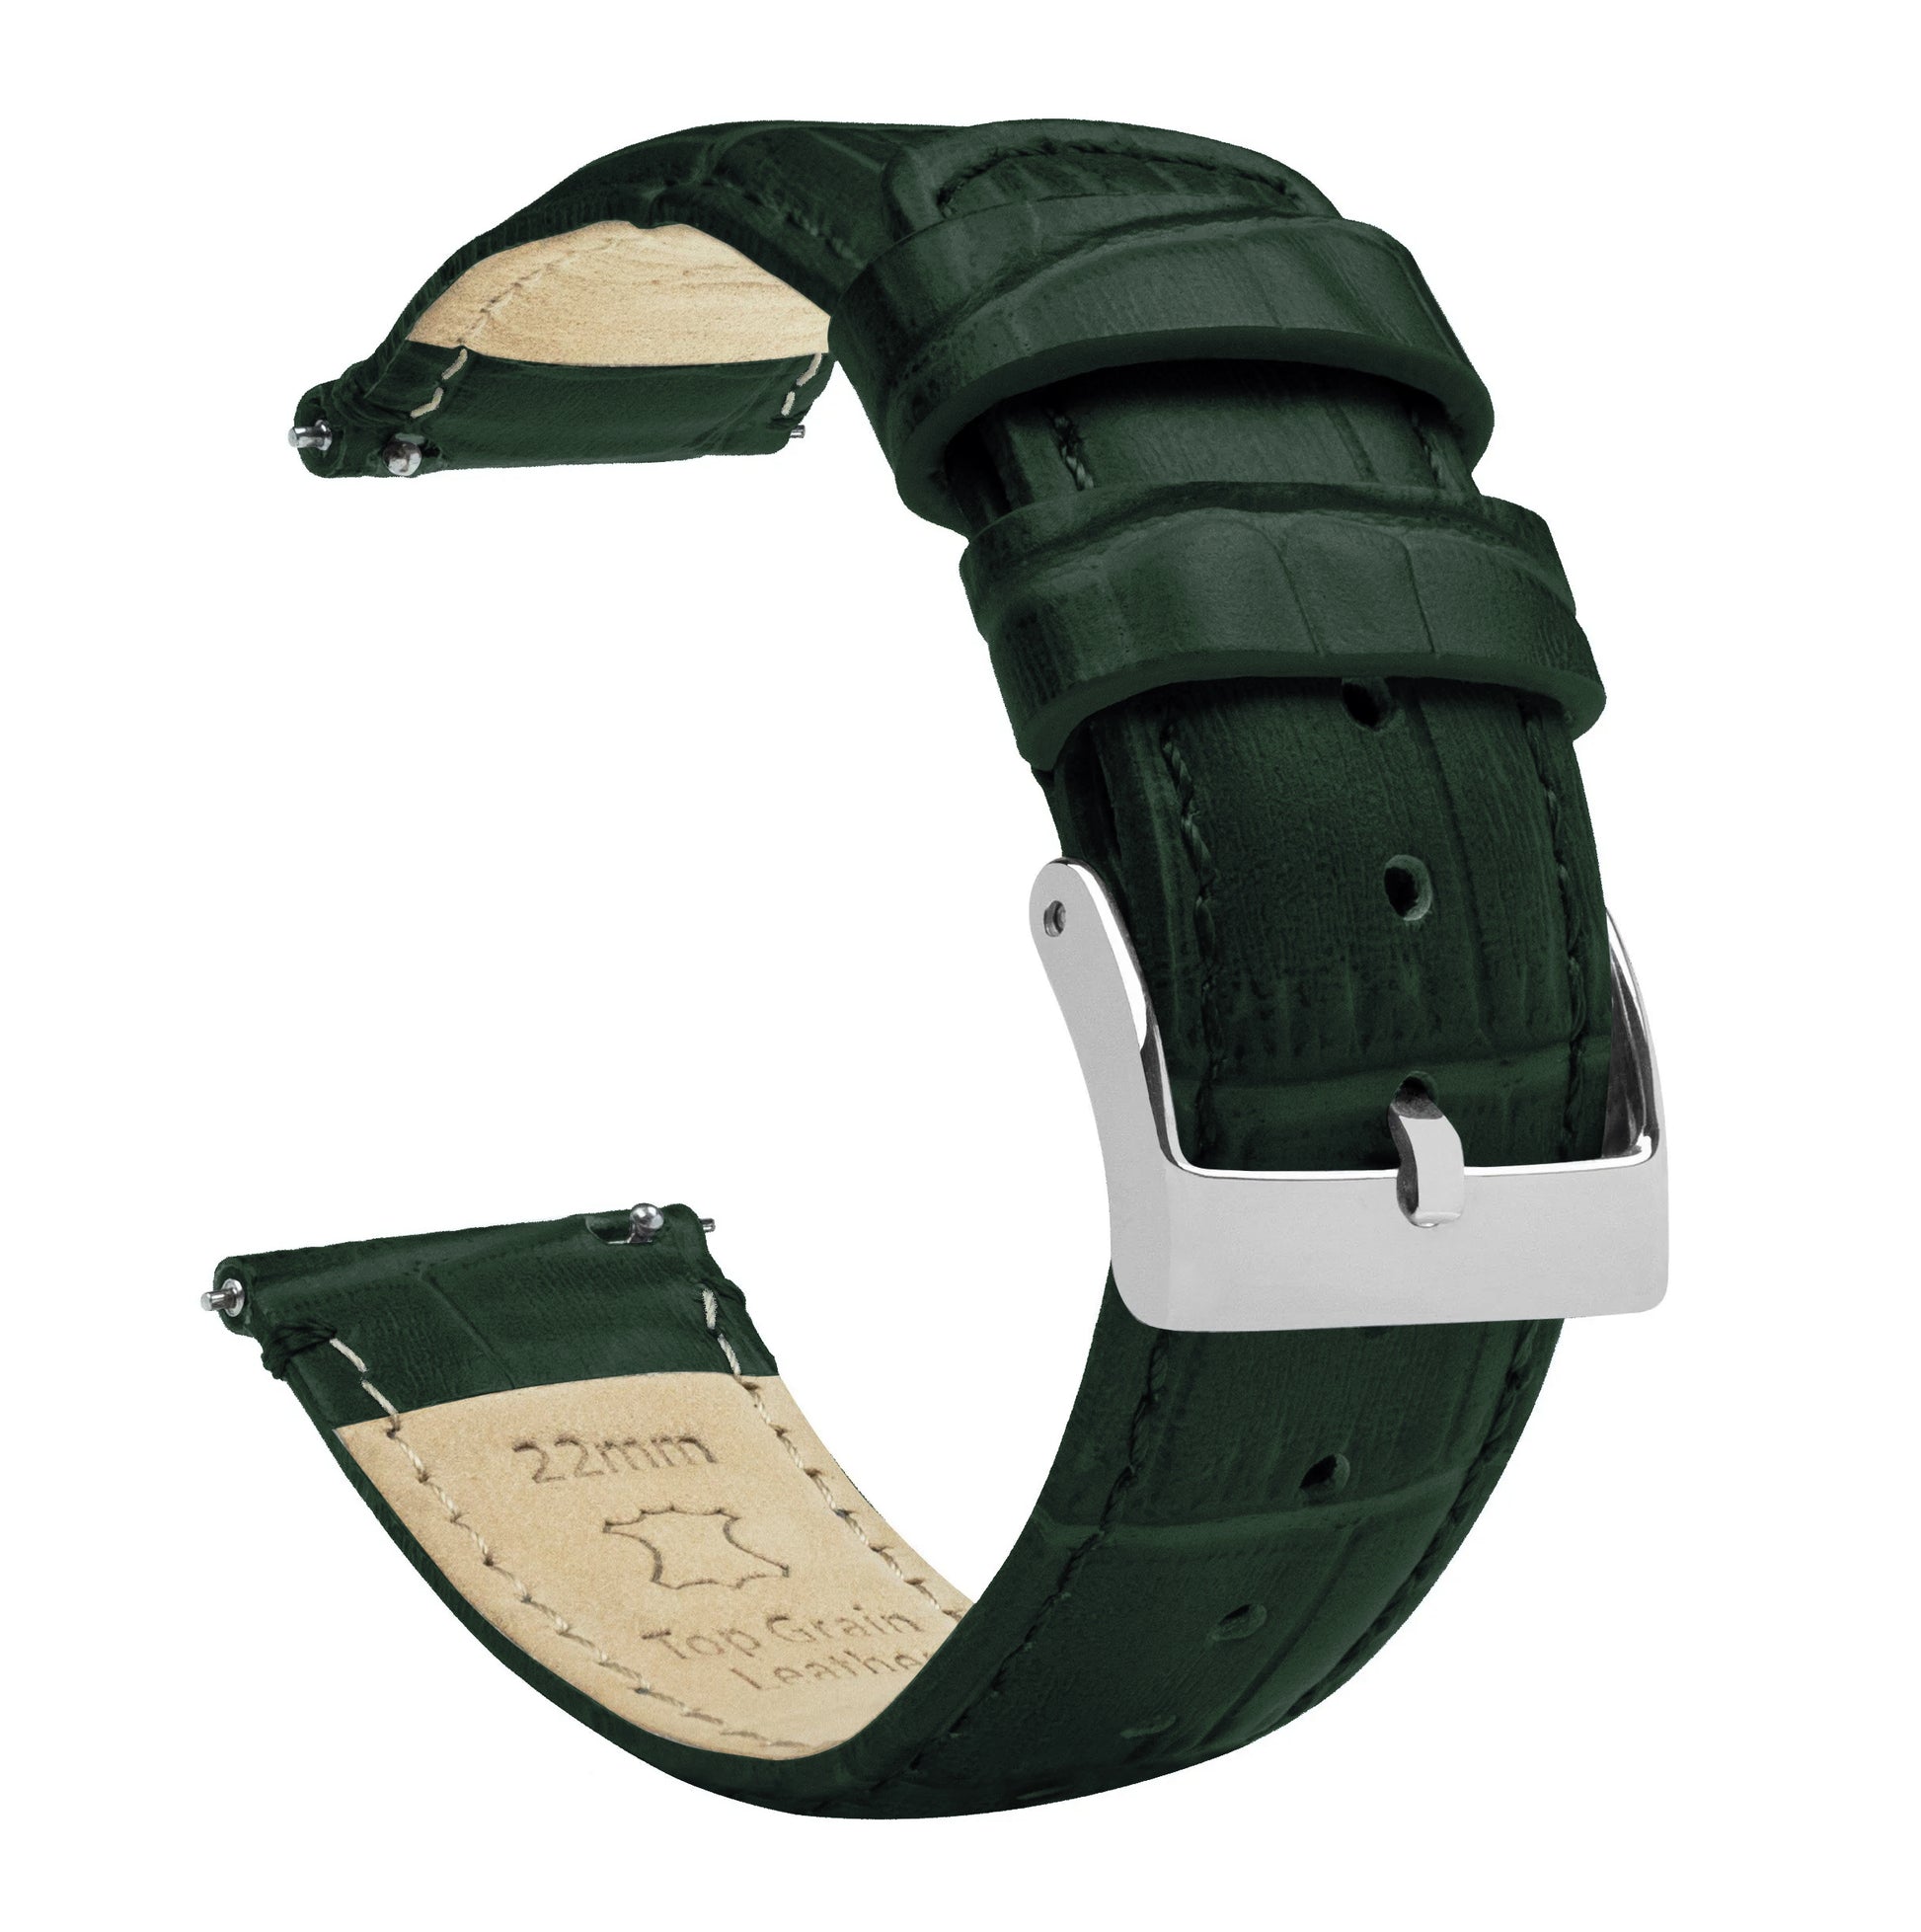 Fossil Q | Forest Green Alligator Grain Leather - Barton Watch Bands